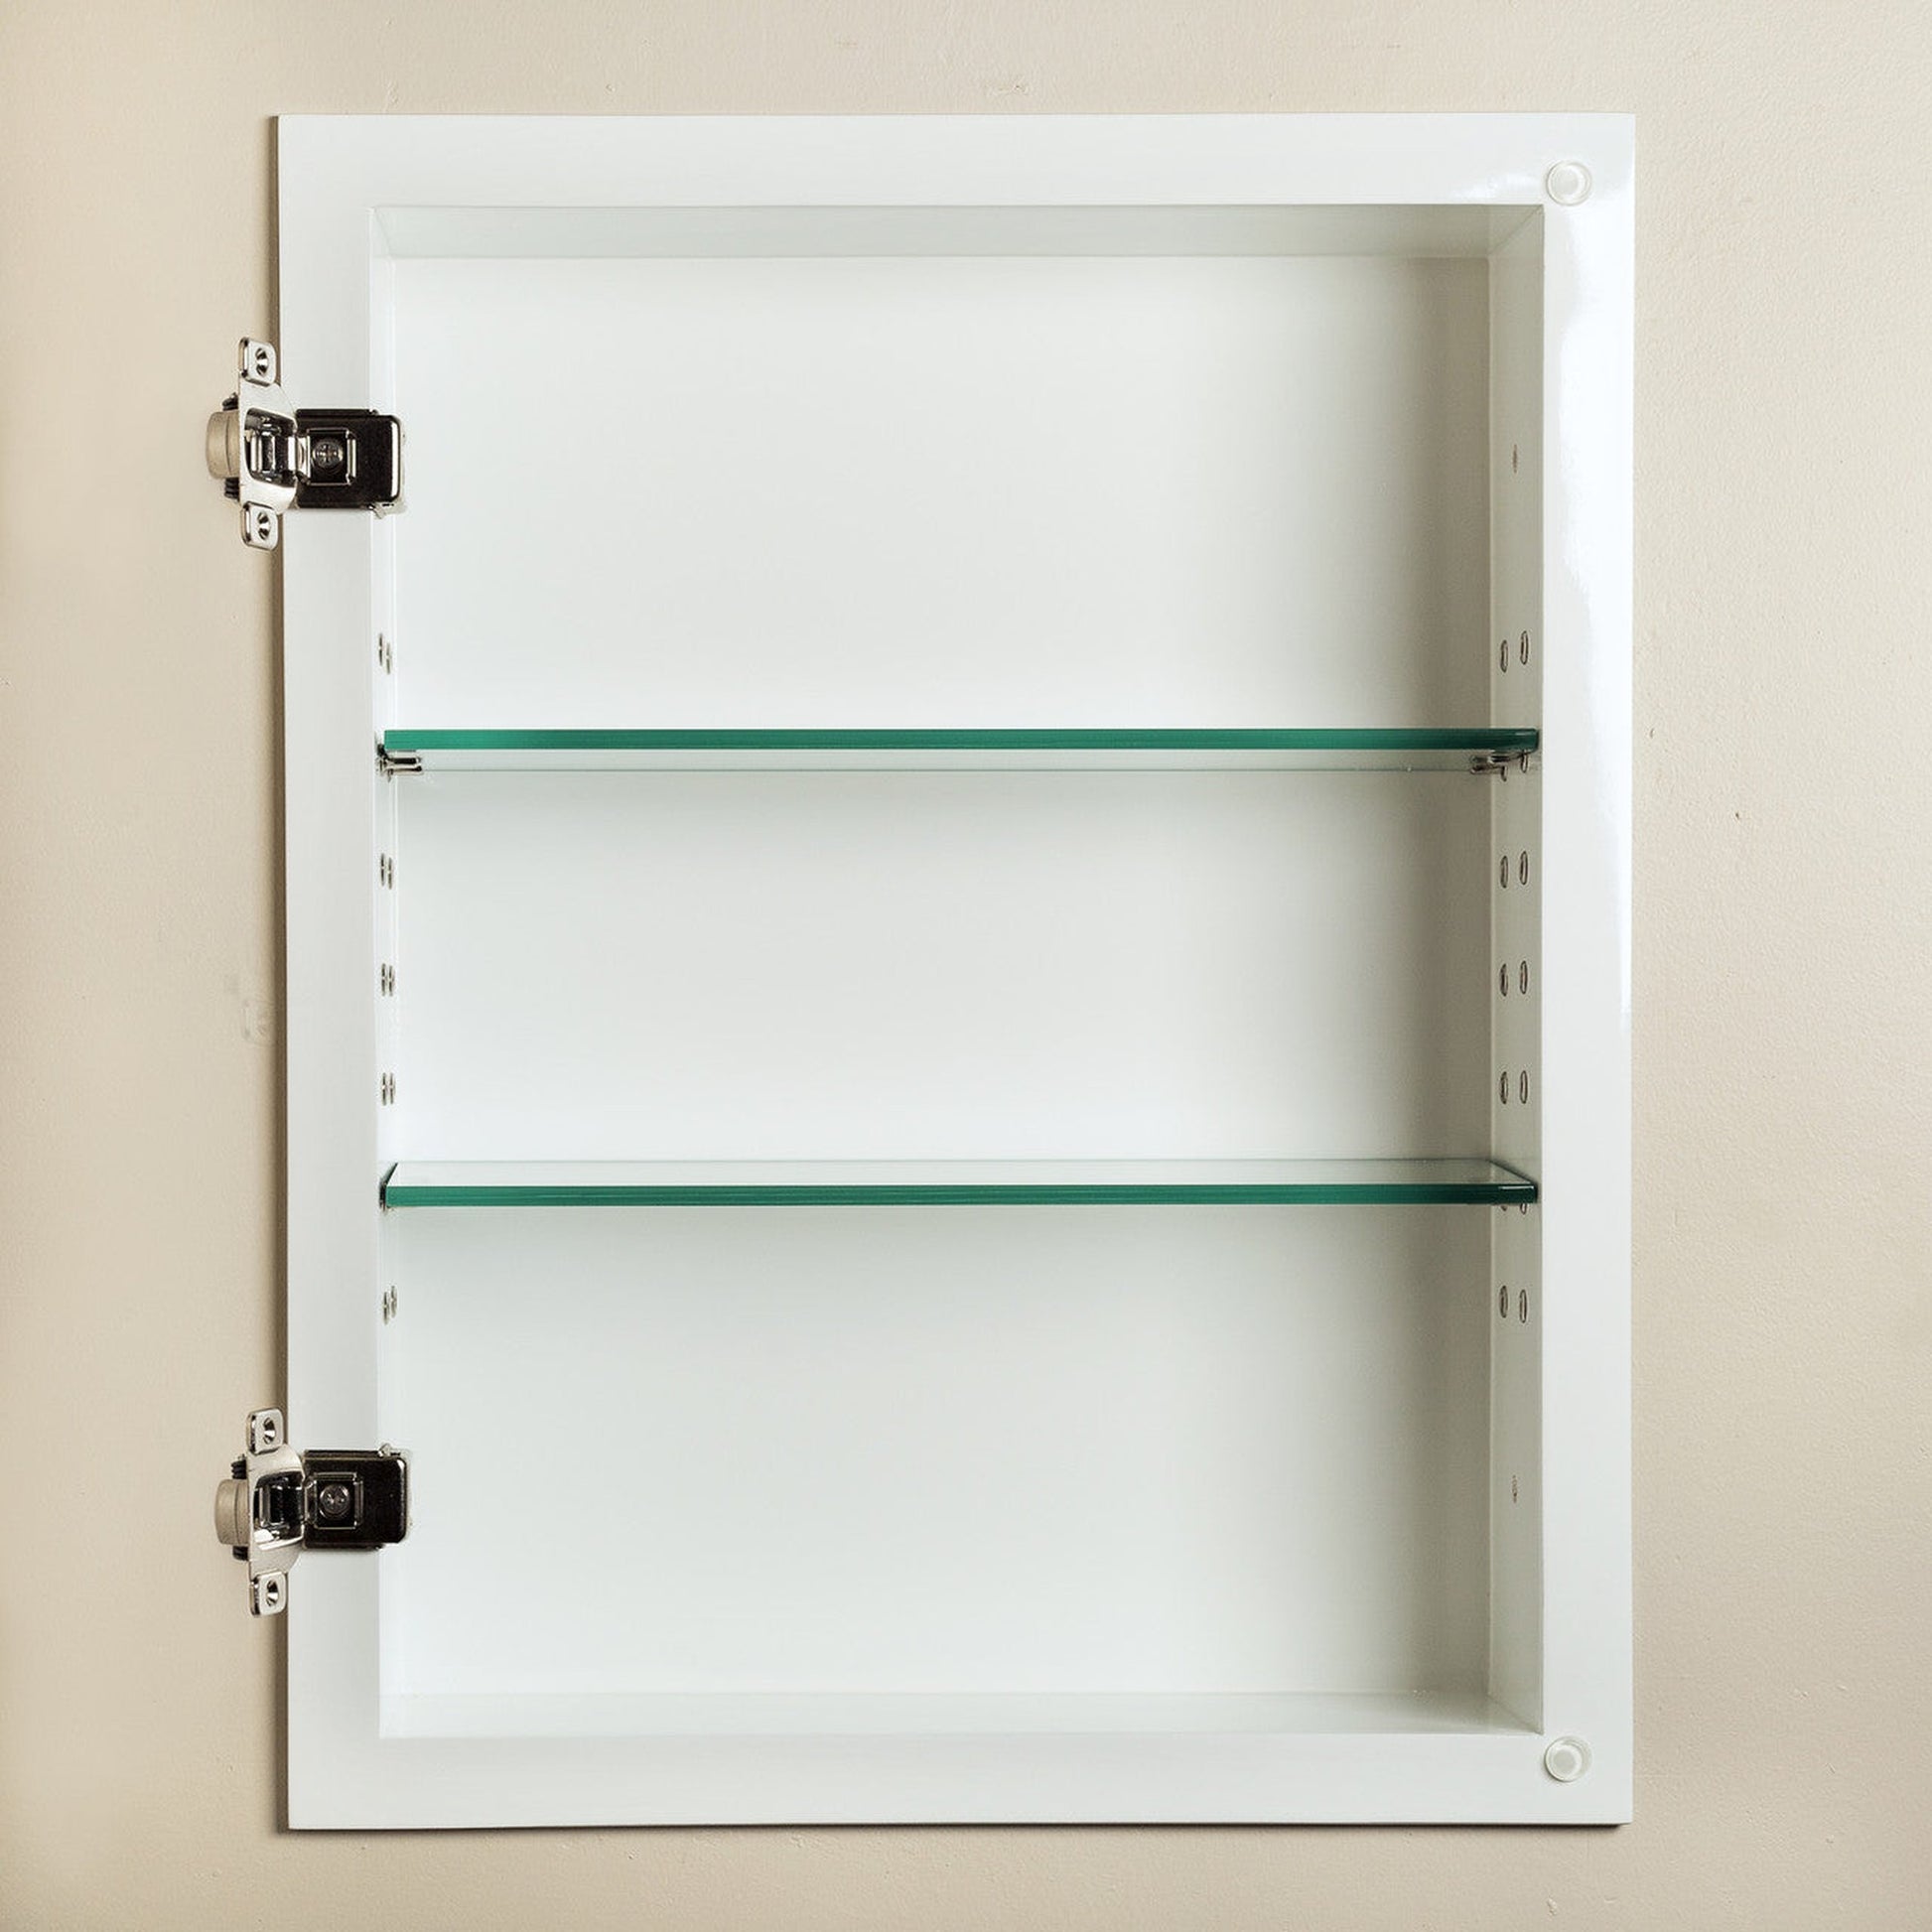 Fox Hollow Furnishings 14" x 18" Unfinished Raised Edge Special 3" Depth White Interior Mirrored Medicine Cabinet